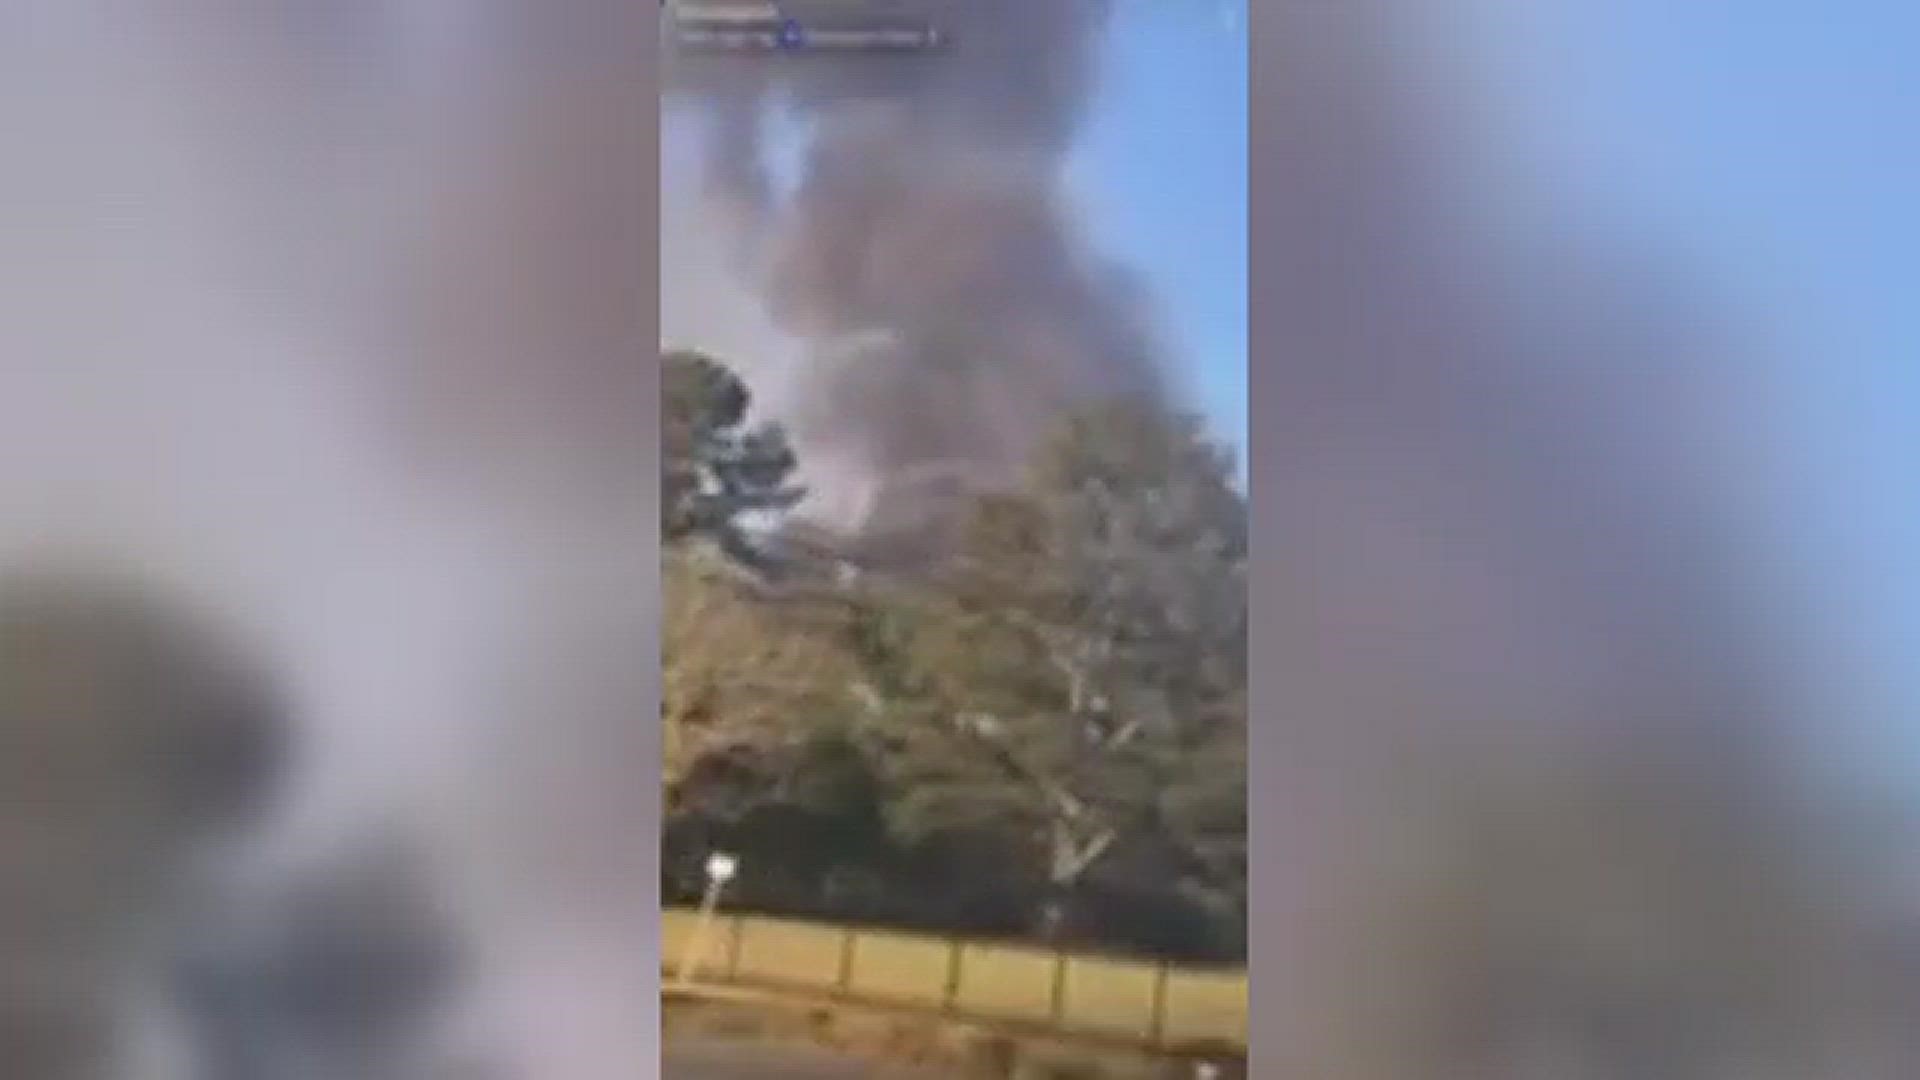 A plane crashed at the General Mills plant in Covington, according to officials. A Snapchat viewer posted video where plumes of smoke could be seen in the same area.